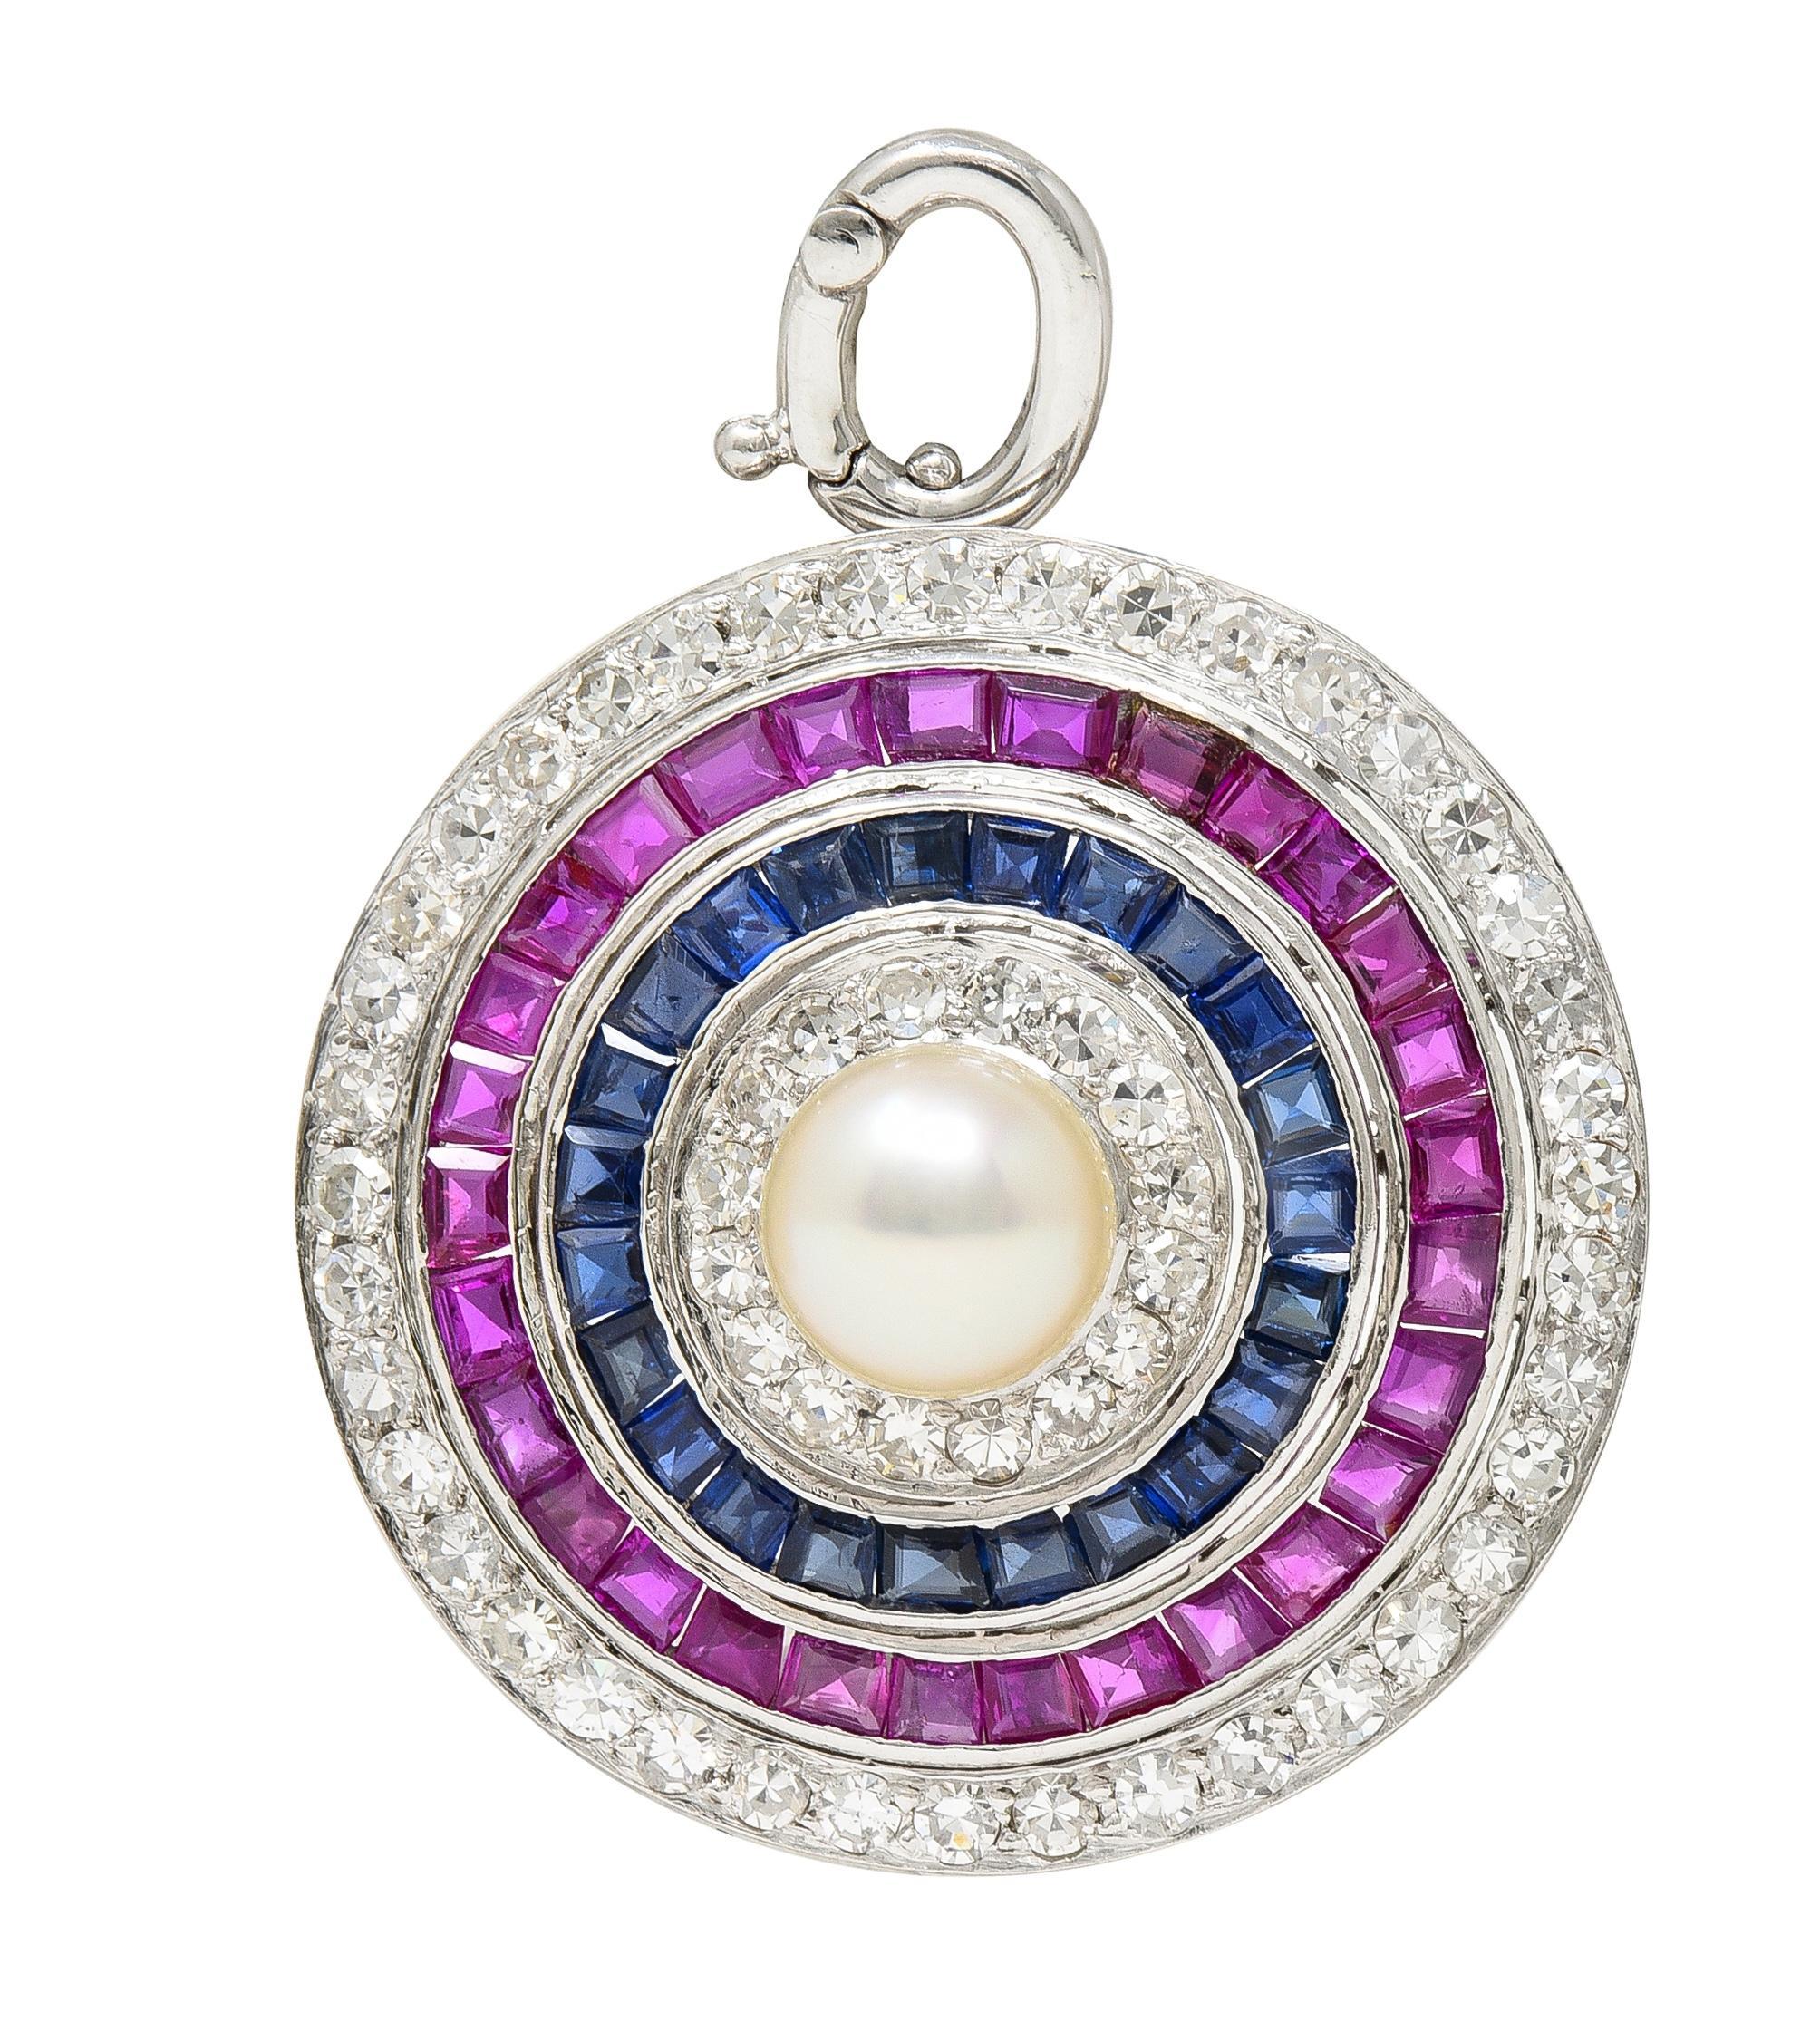 Designed as a tiered circular form centering a 8.0 mm round pearl 
Cream in body color with strong iridescence and excellent luster
With alternating tiers of diamonds, rubies, and sapphires 
Diamonds weigh approximately 1.68 carats total 
G/H color